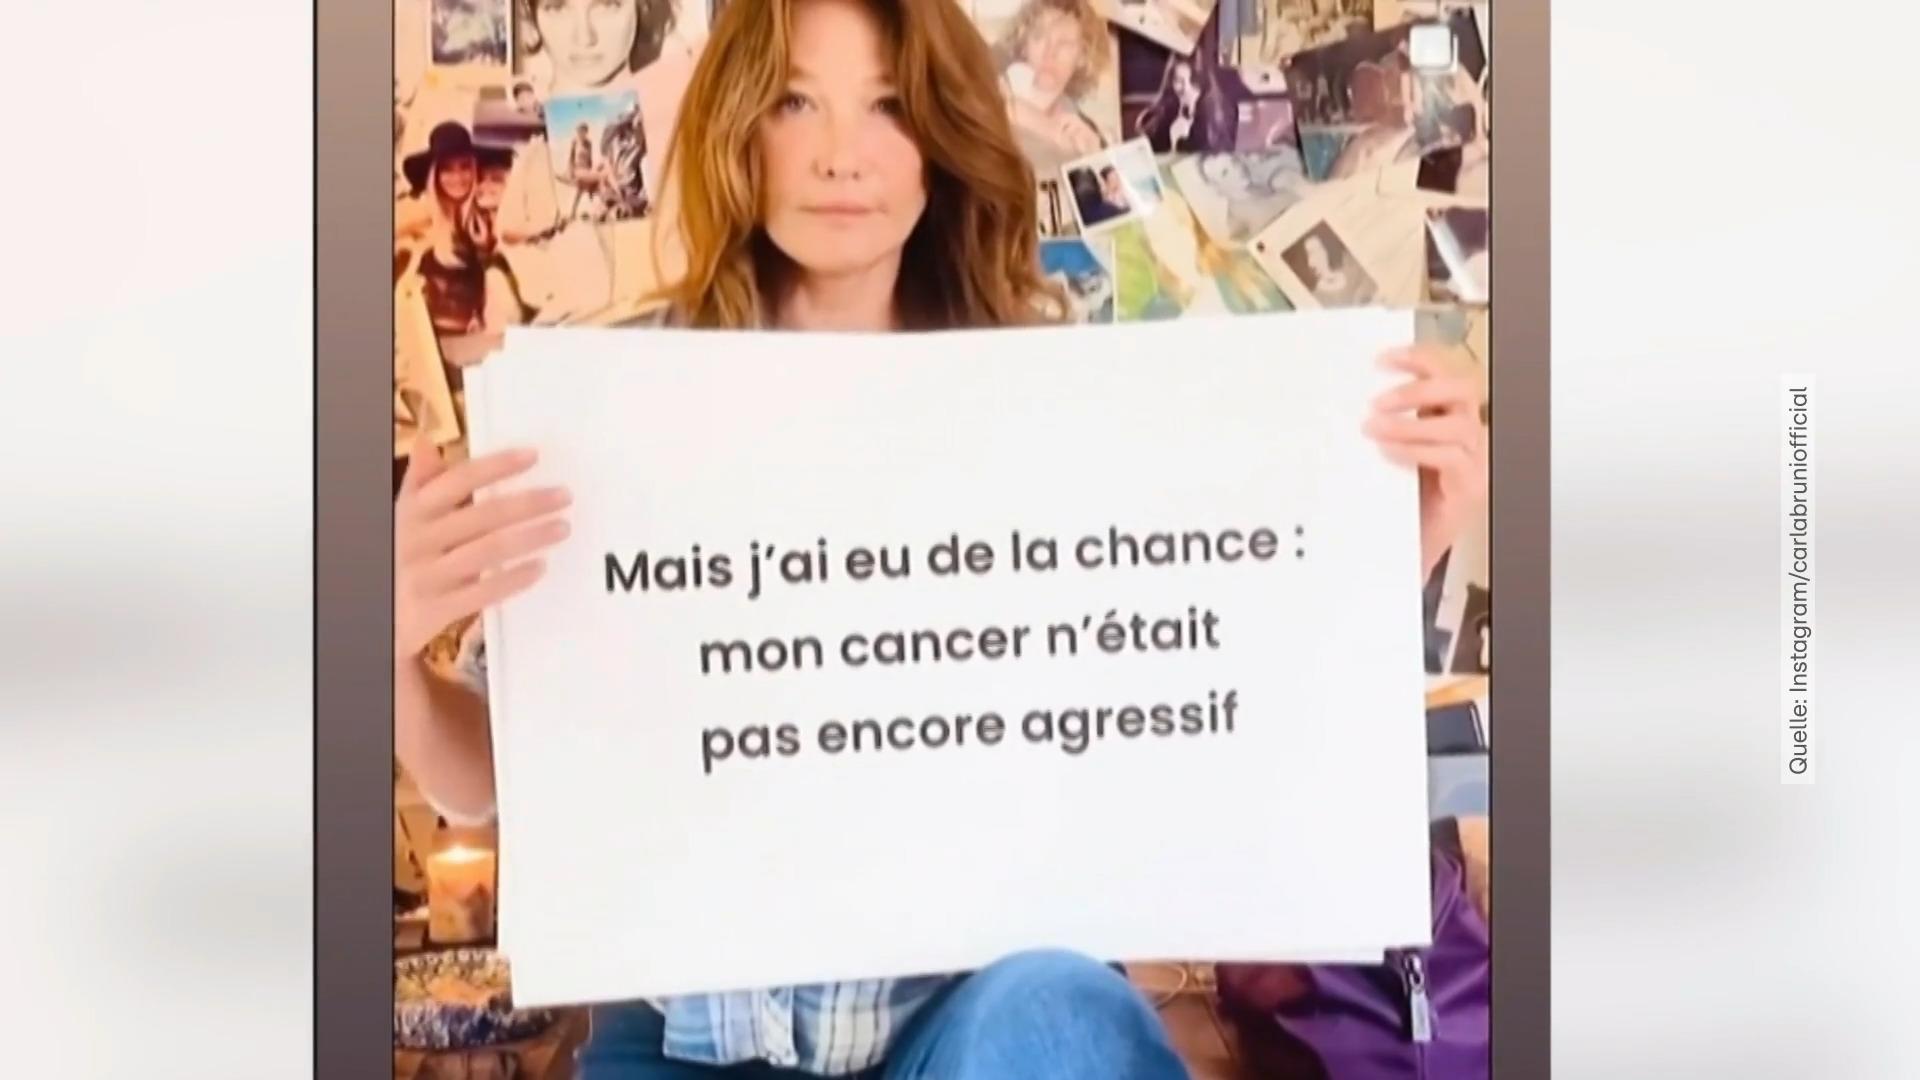 Carla Bruni had breast cancer: “Your life depends on it”